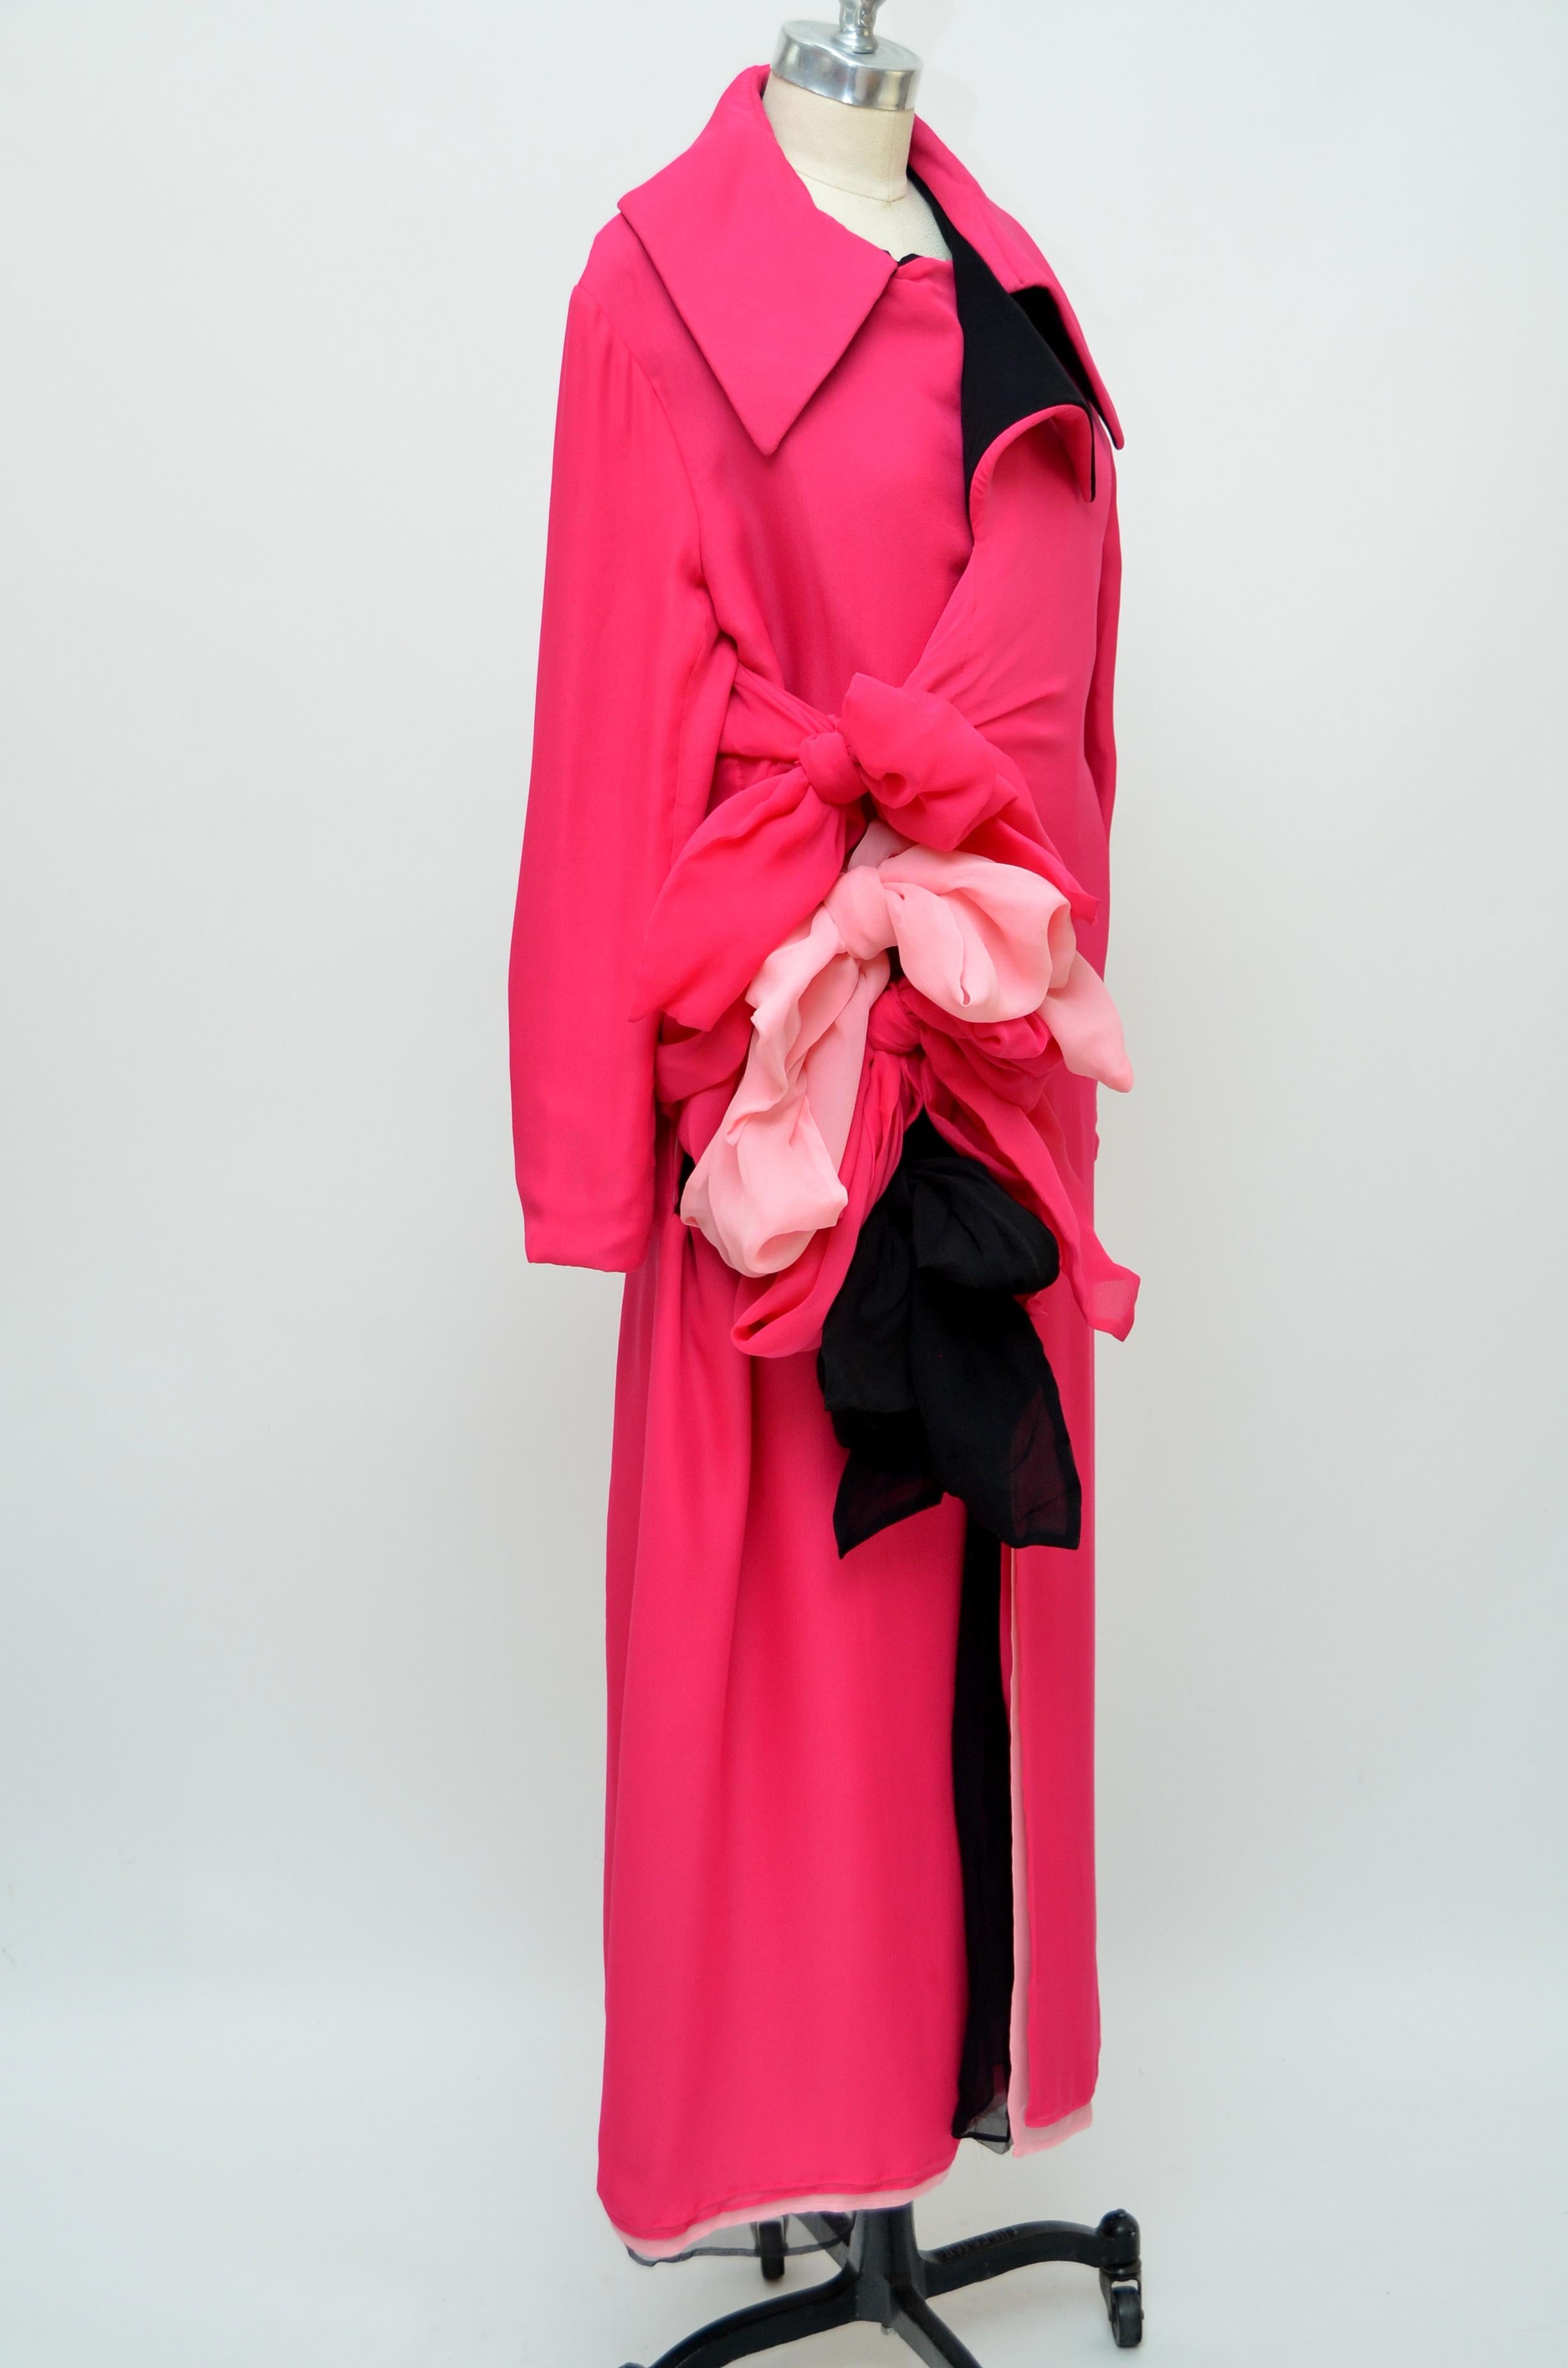 Yohji Yamamoto runway 2005 pink  fuchsia silk coat dress .
Made of multiple layers of silk tied together with sash tie  bow's  in the front.
Size 3.
Condition:looks new, possibly never worn.Fabric looks new.

This piece was photographed on mannequin